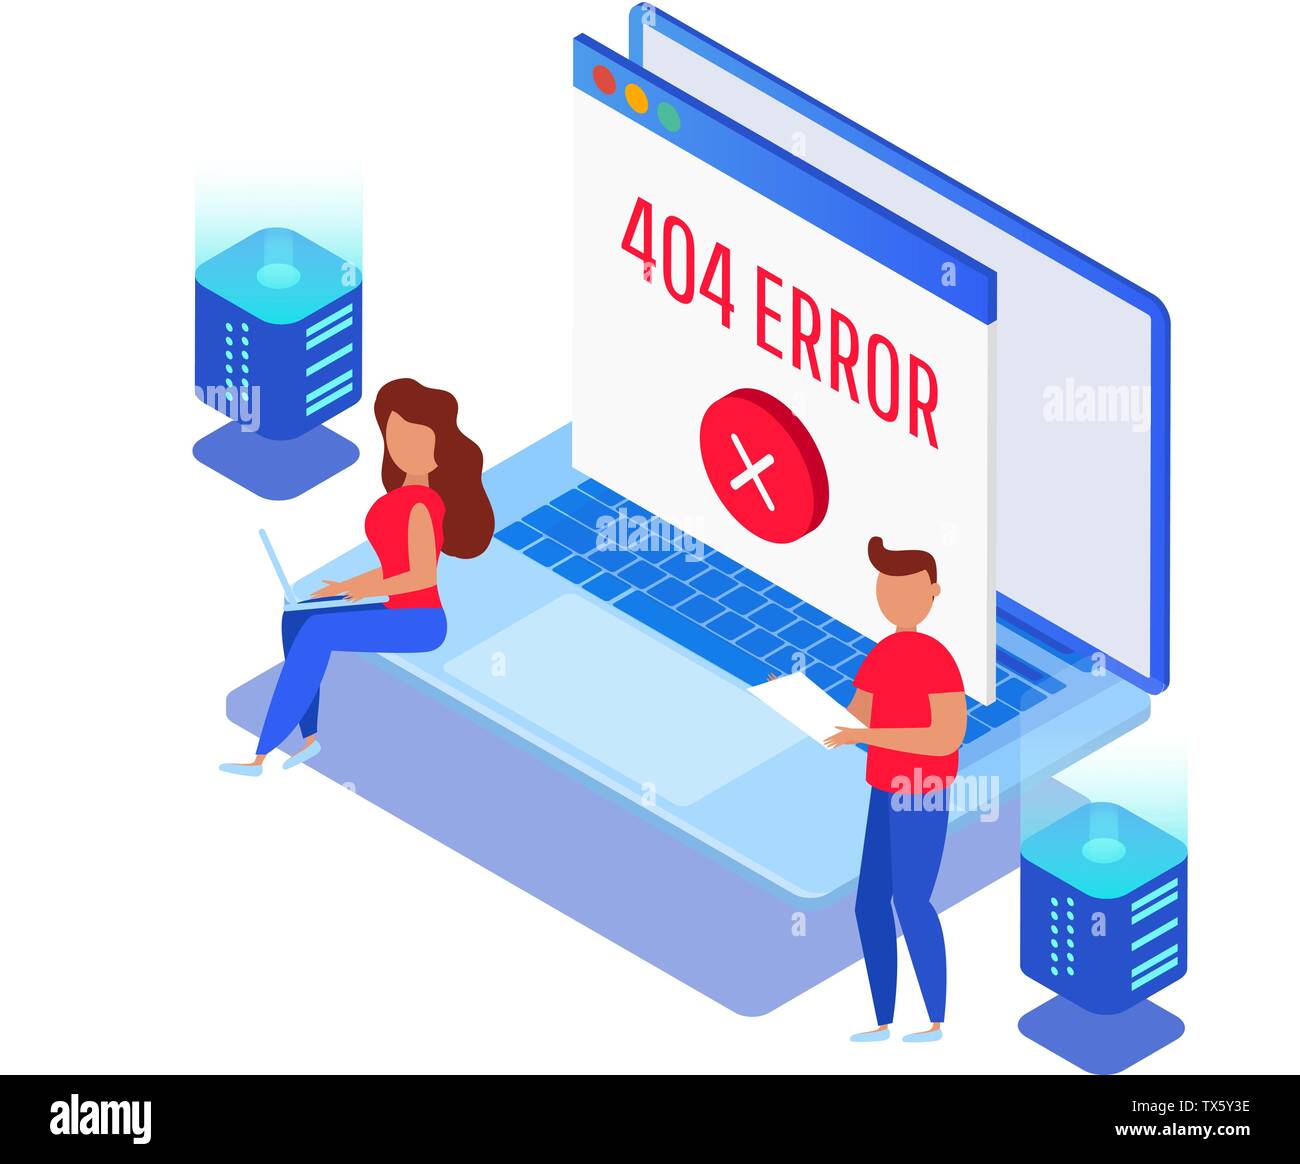 Template for web page with 404 error Stock Vector